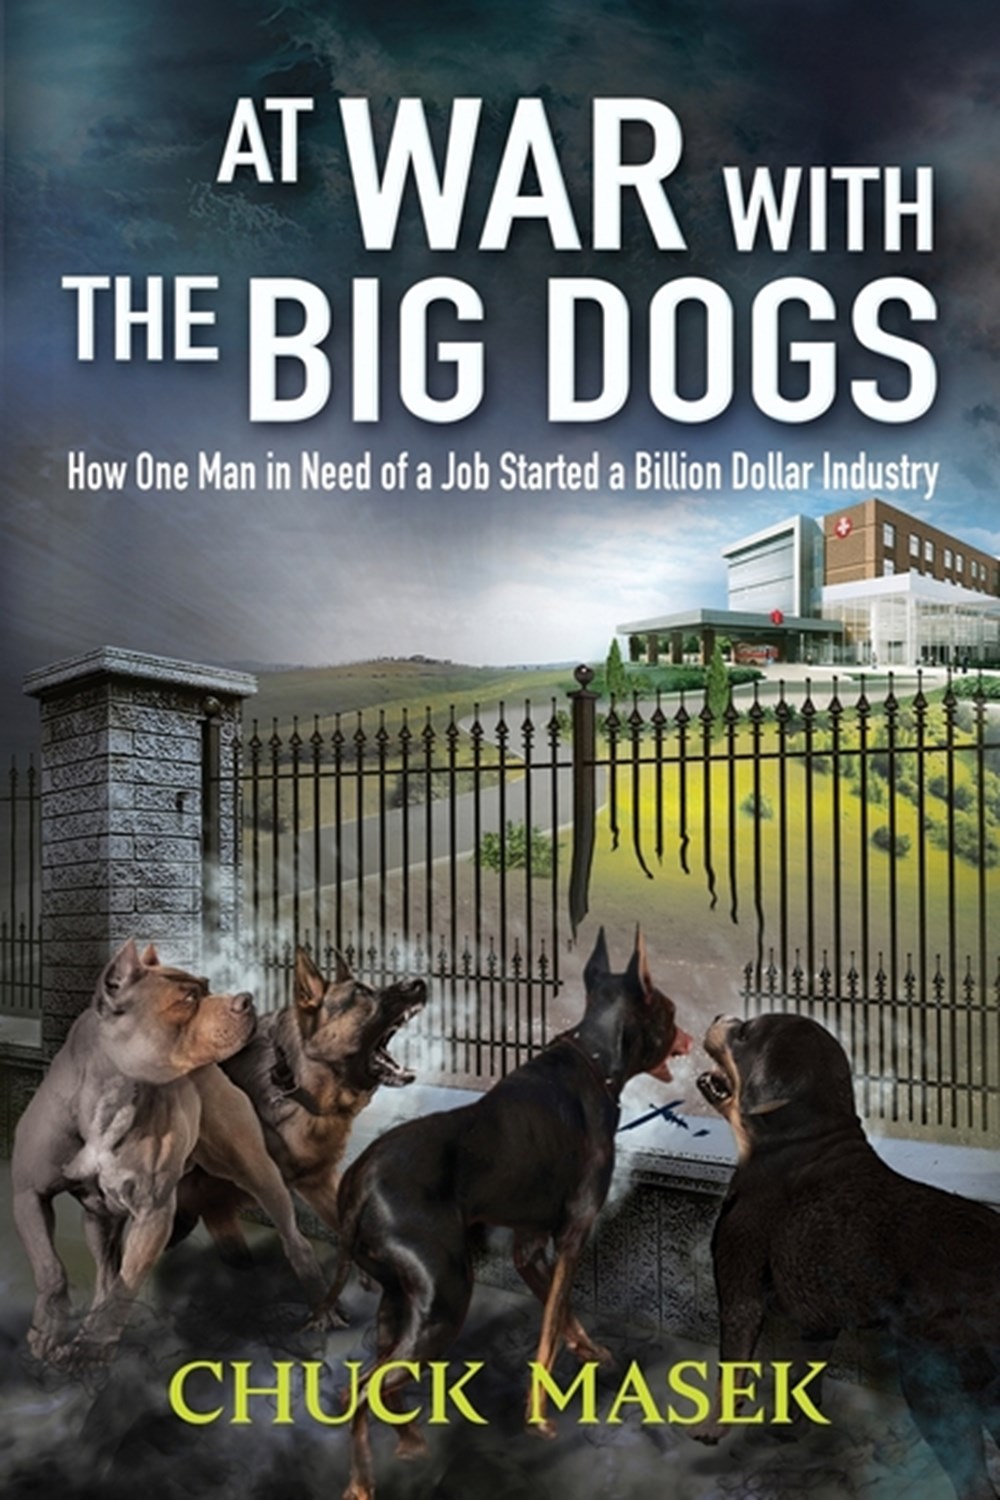 At War with the Big Dogs How One Man in Need of a Job Started a Billion Dollar Industry